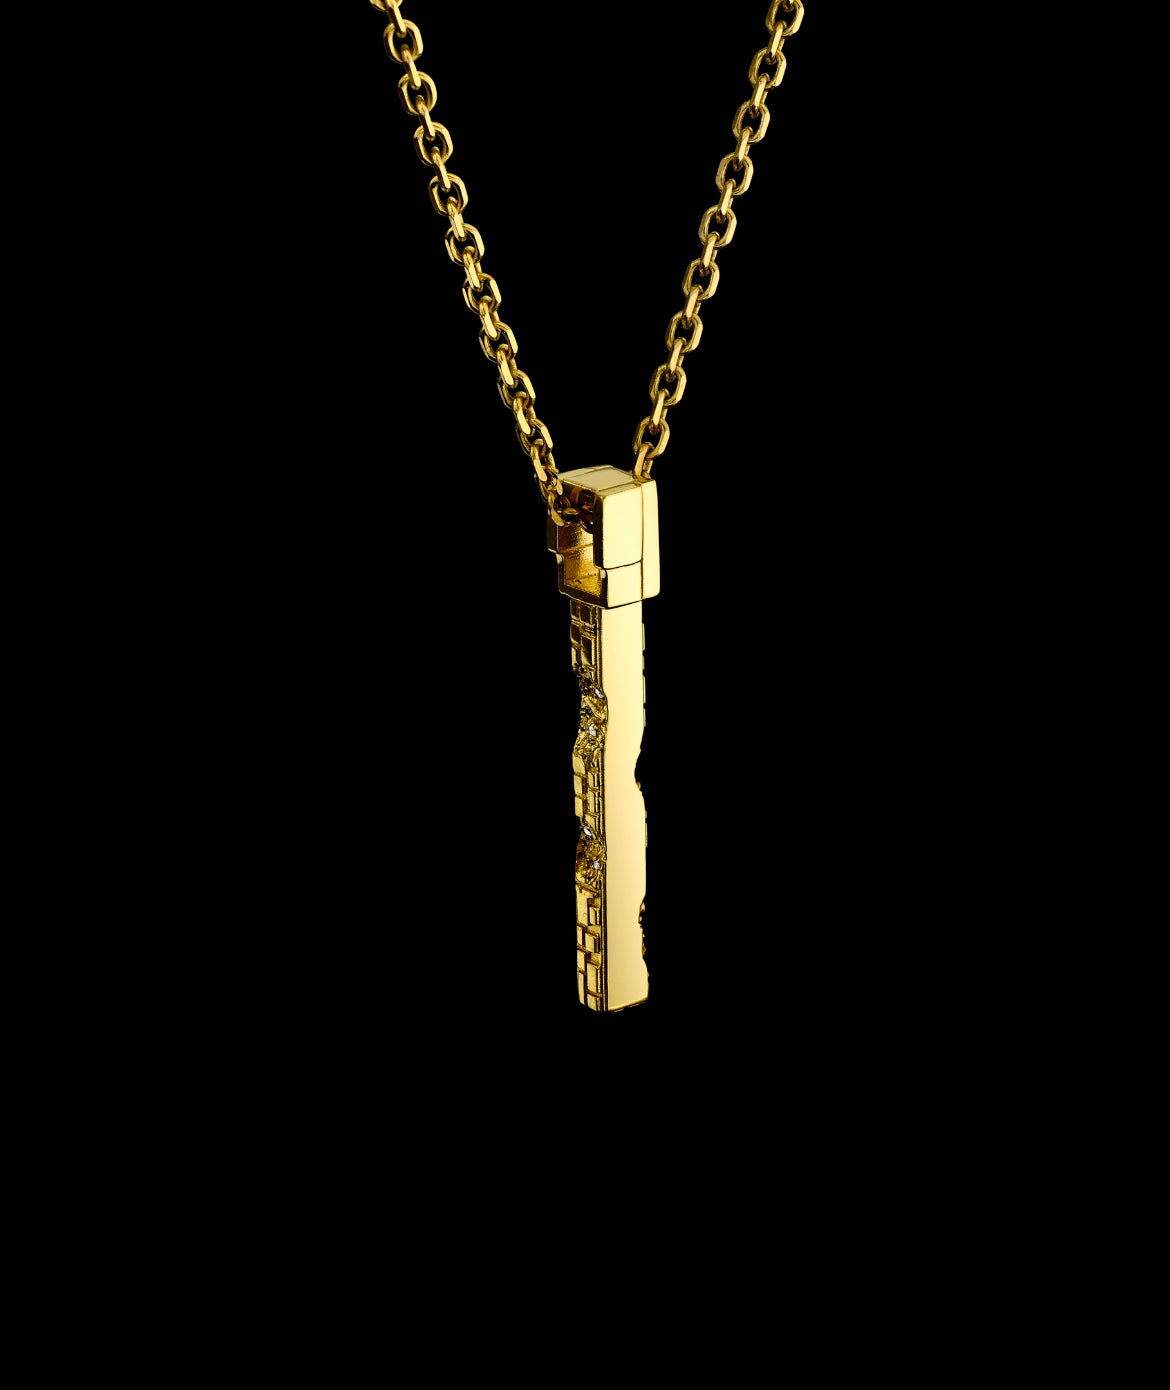 Eroded Architecture 18k Yellow Gold Large Bar Necklace with round brilliant diamonds.  Edition of 50.